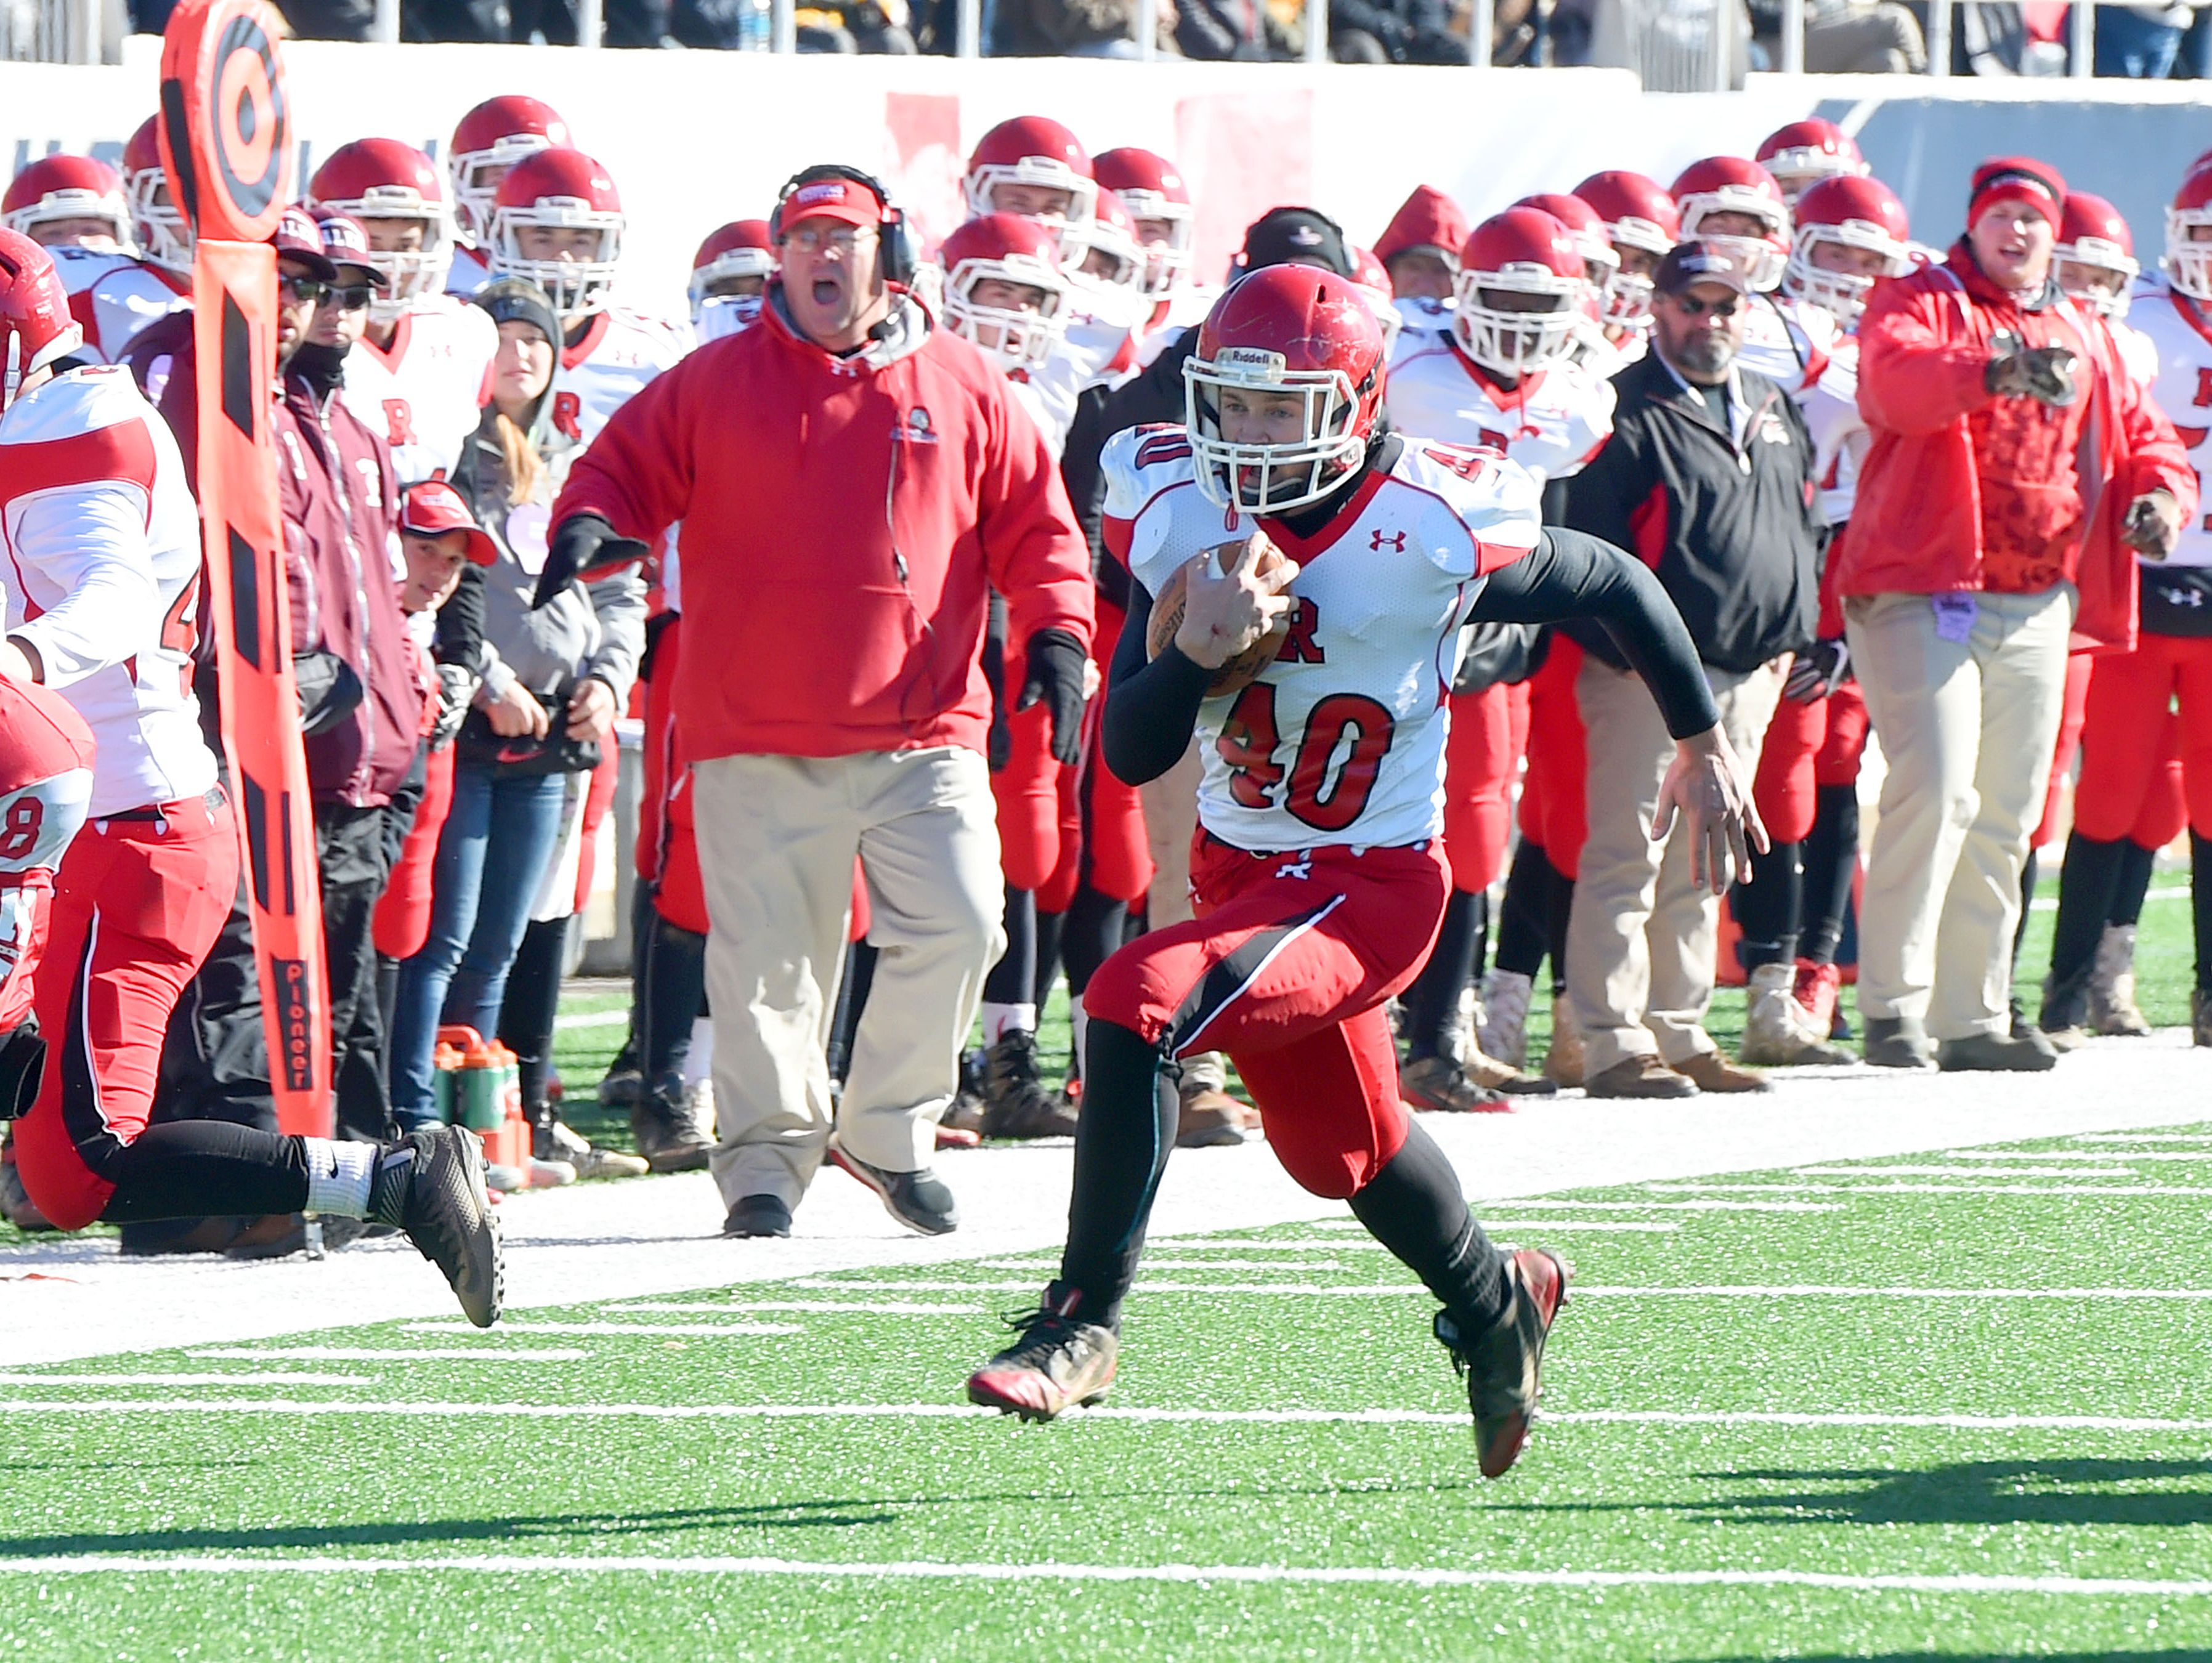 Riverheads' Harrison Schaefer breaks away with the ball and runs the ball towards the end zone for a touchdown during the Group 1A state championship football game played in Salem on Saturday, Dec. 10, 2016.